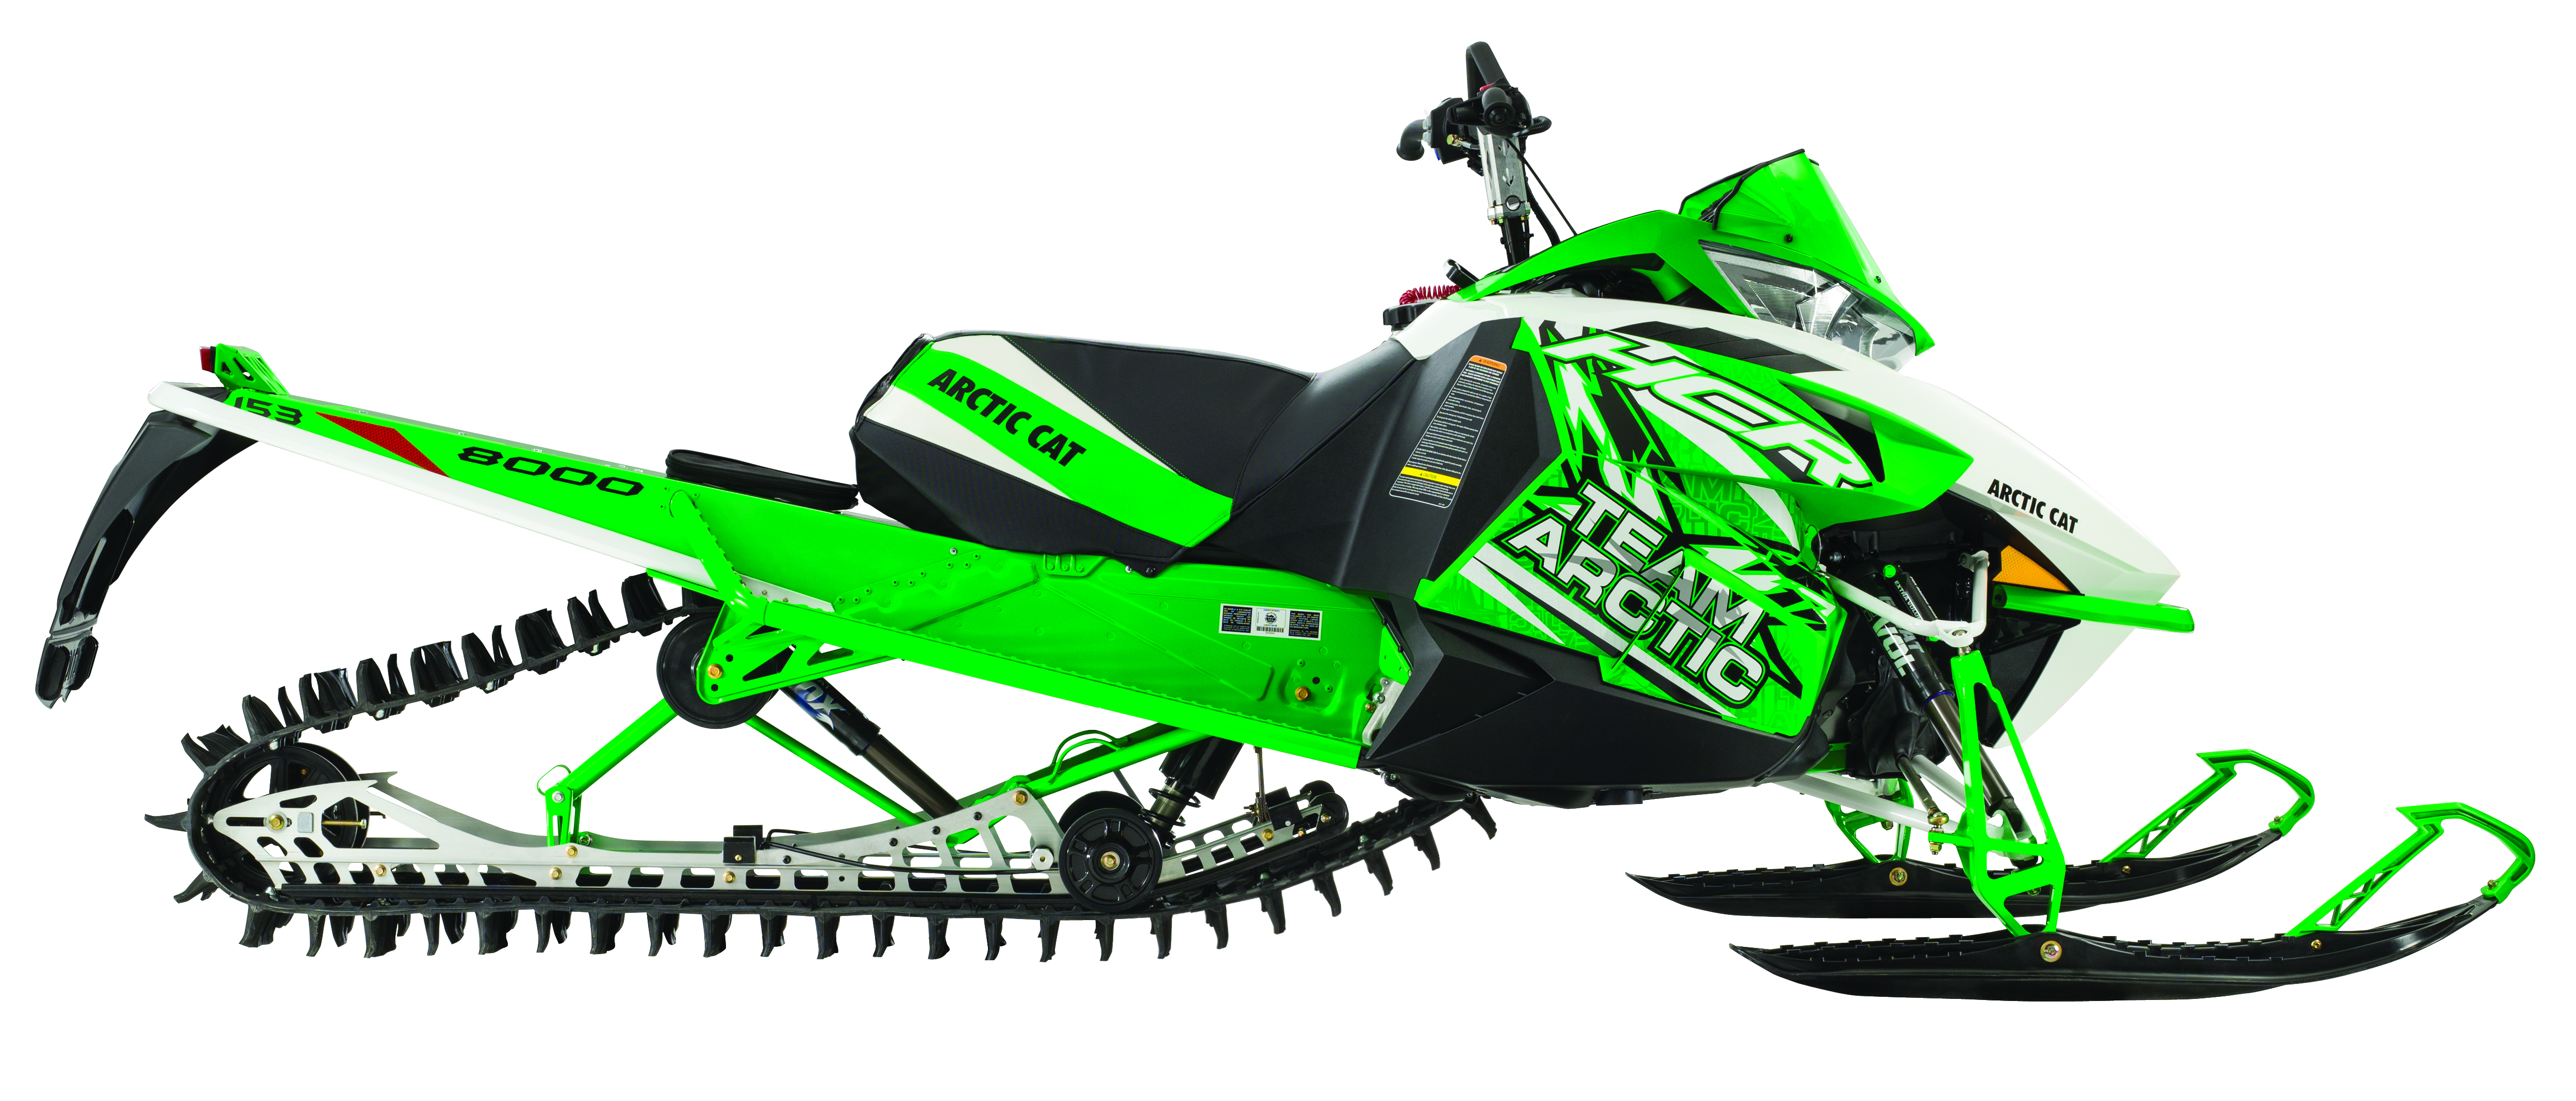 utility snowmobile utility snowmobiles are common when any work or 4996x2136